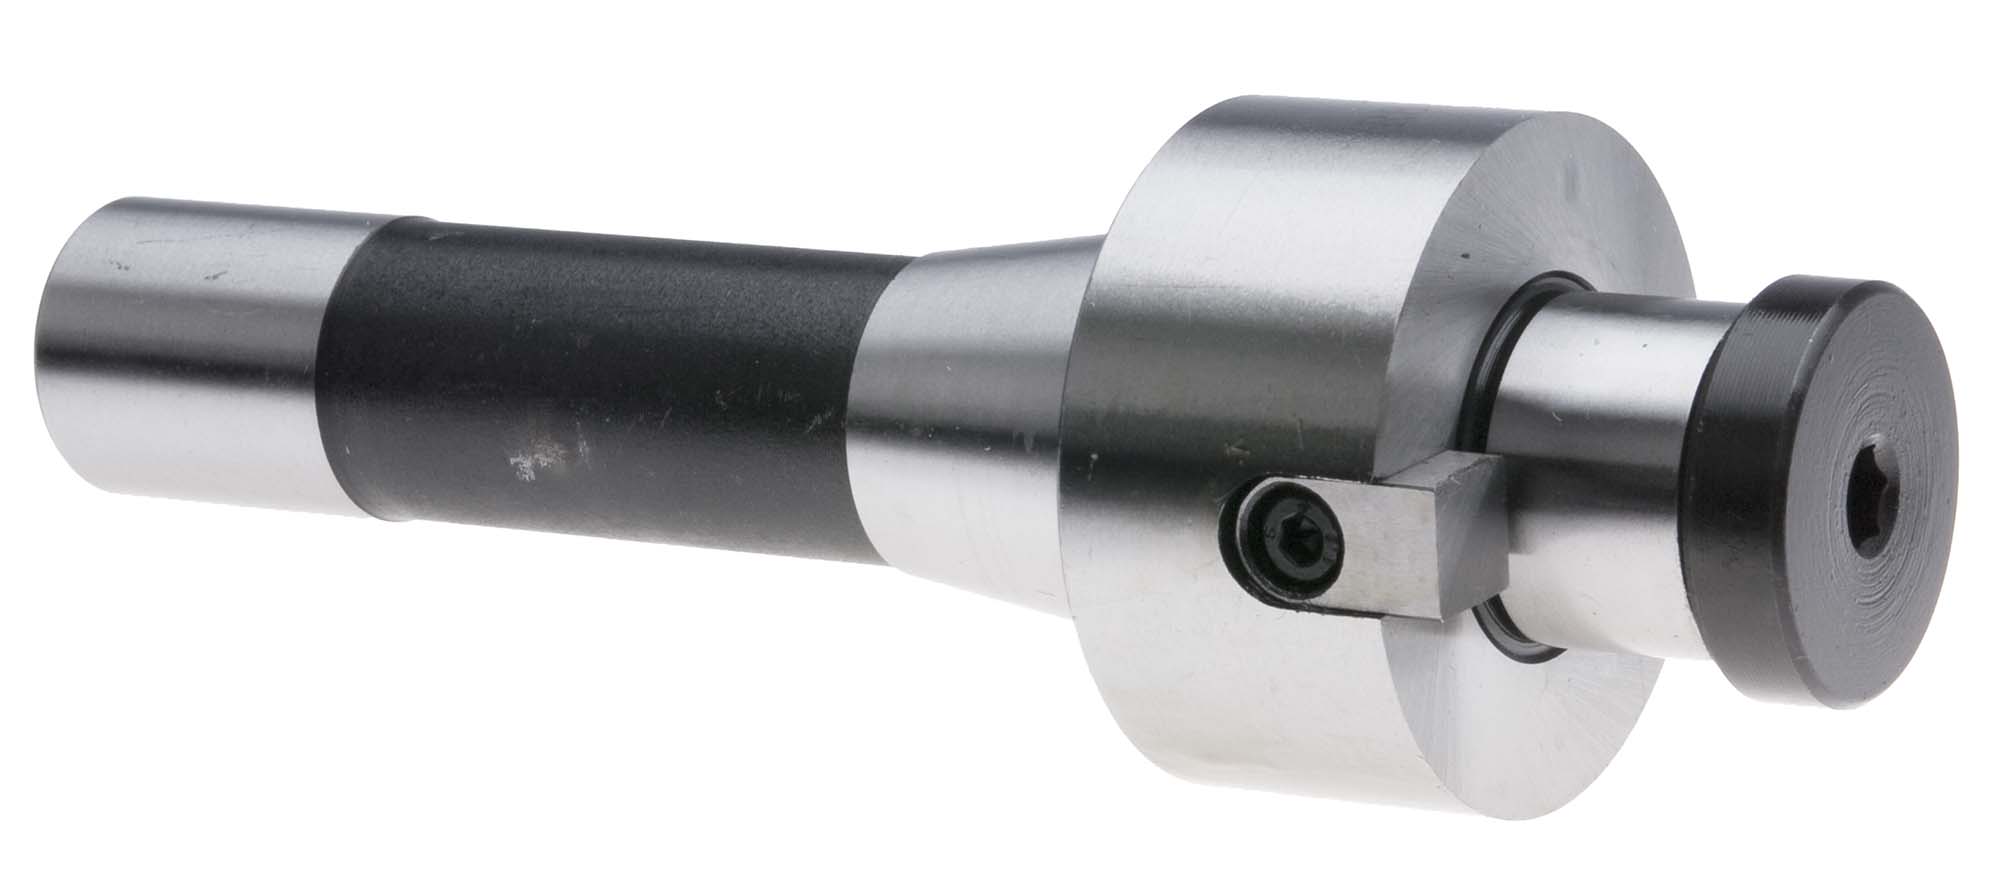 1 1/2" R8 Shell End Mill Arbor